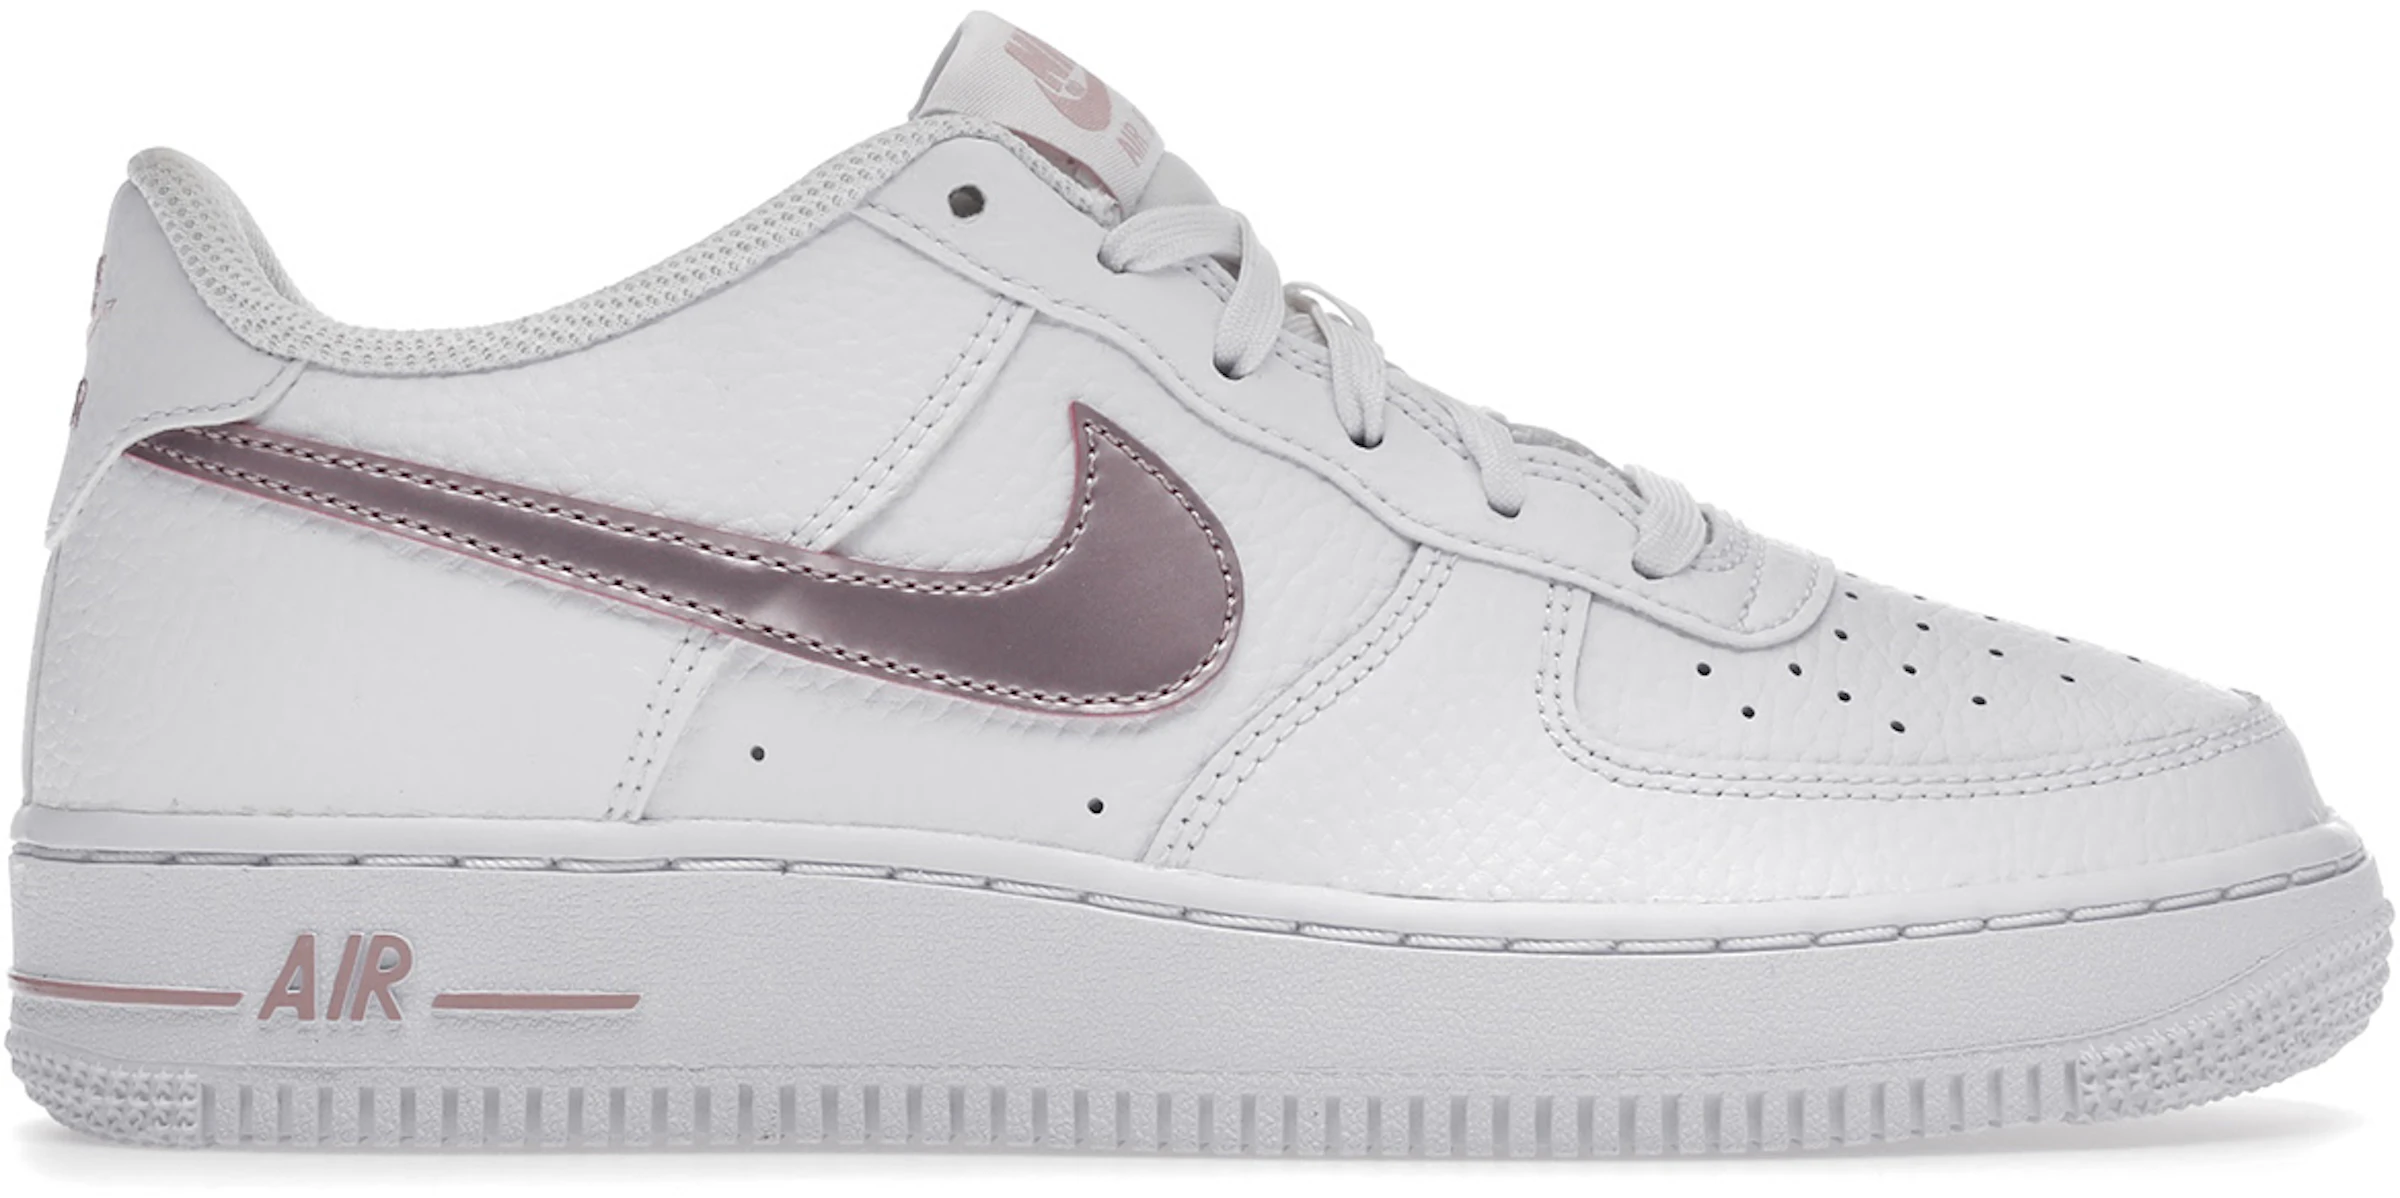 Nike Air Force 1 Low White Pink Glaze (GS) - CT3839-104